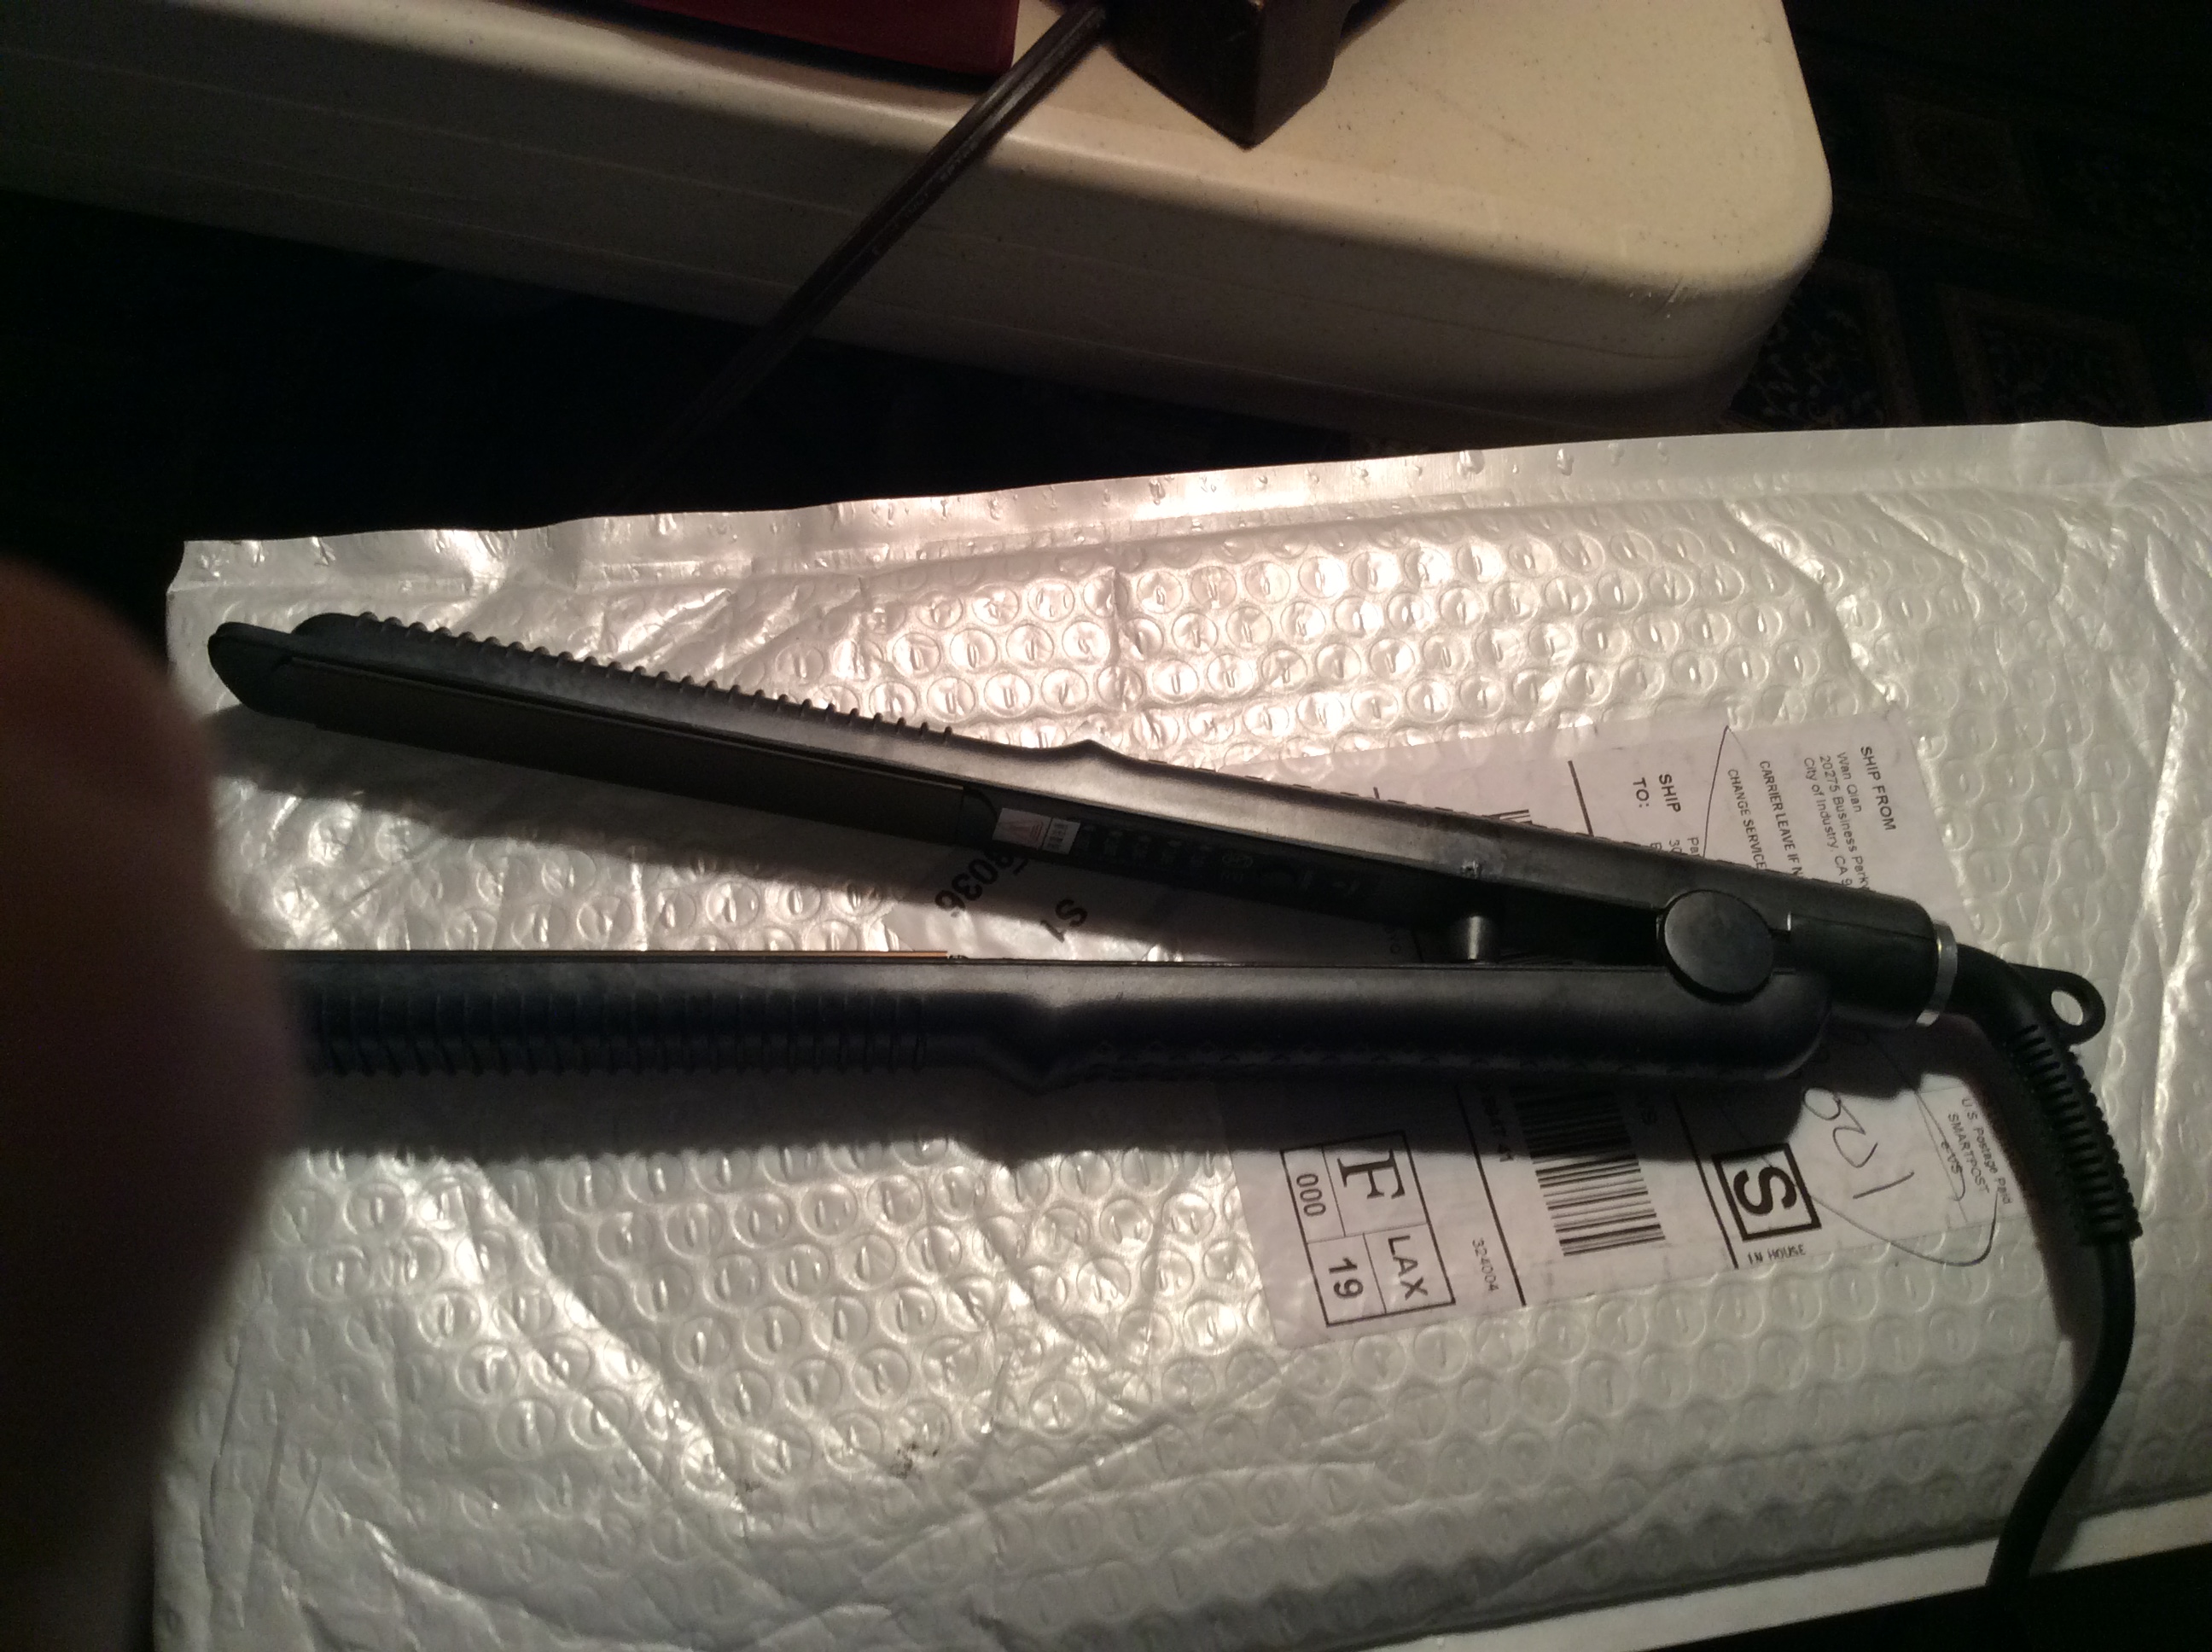 Suppose to be a curling iron, this is a flat iron.